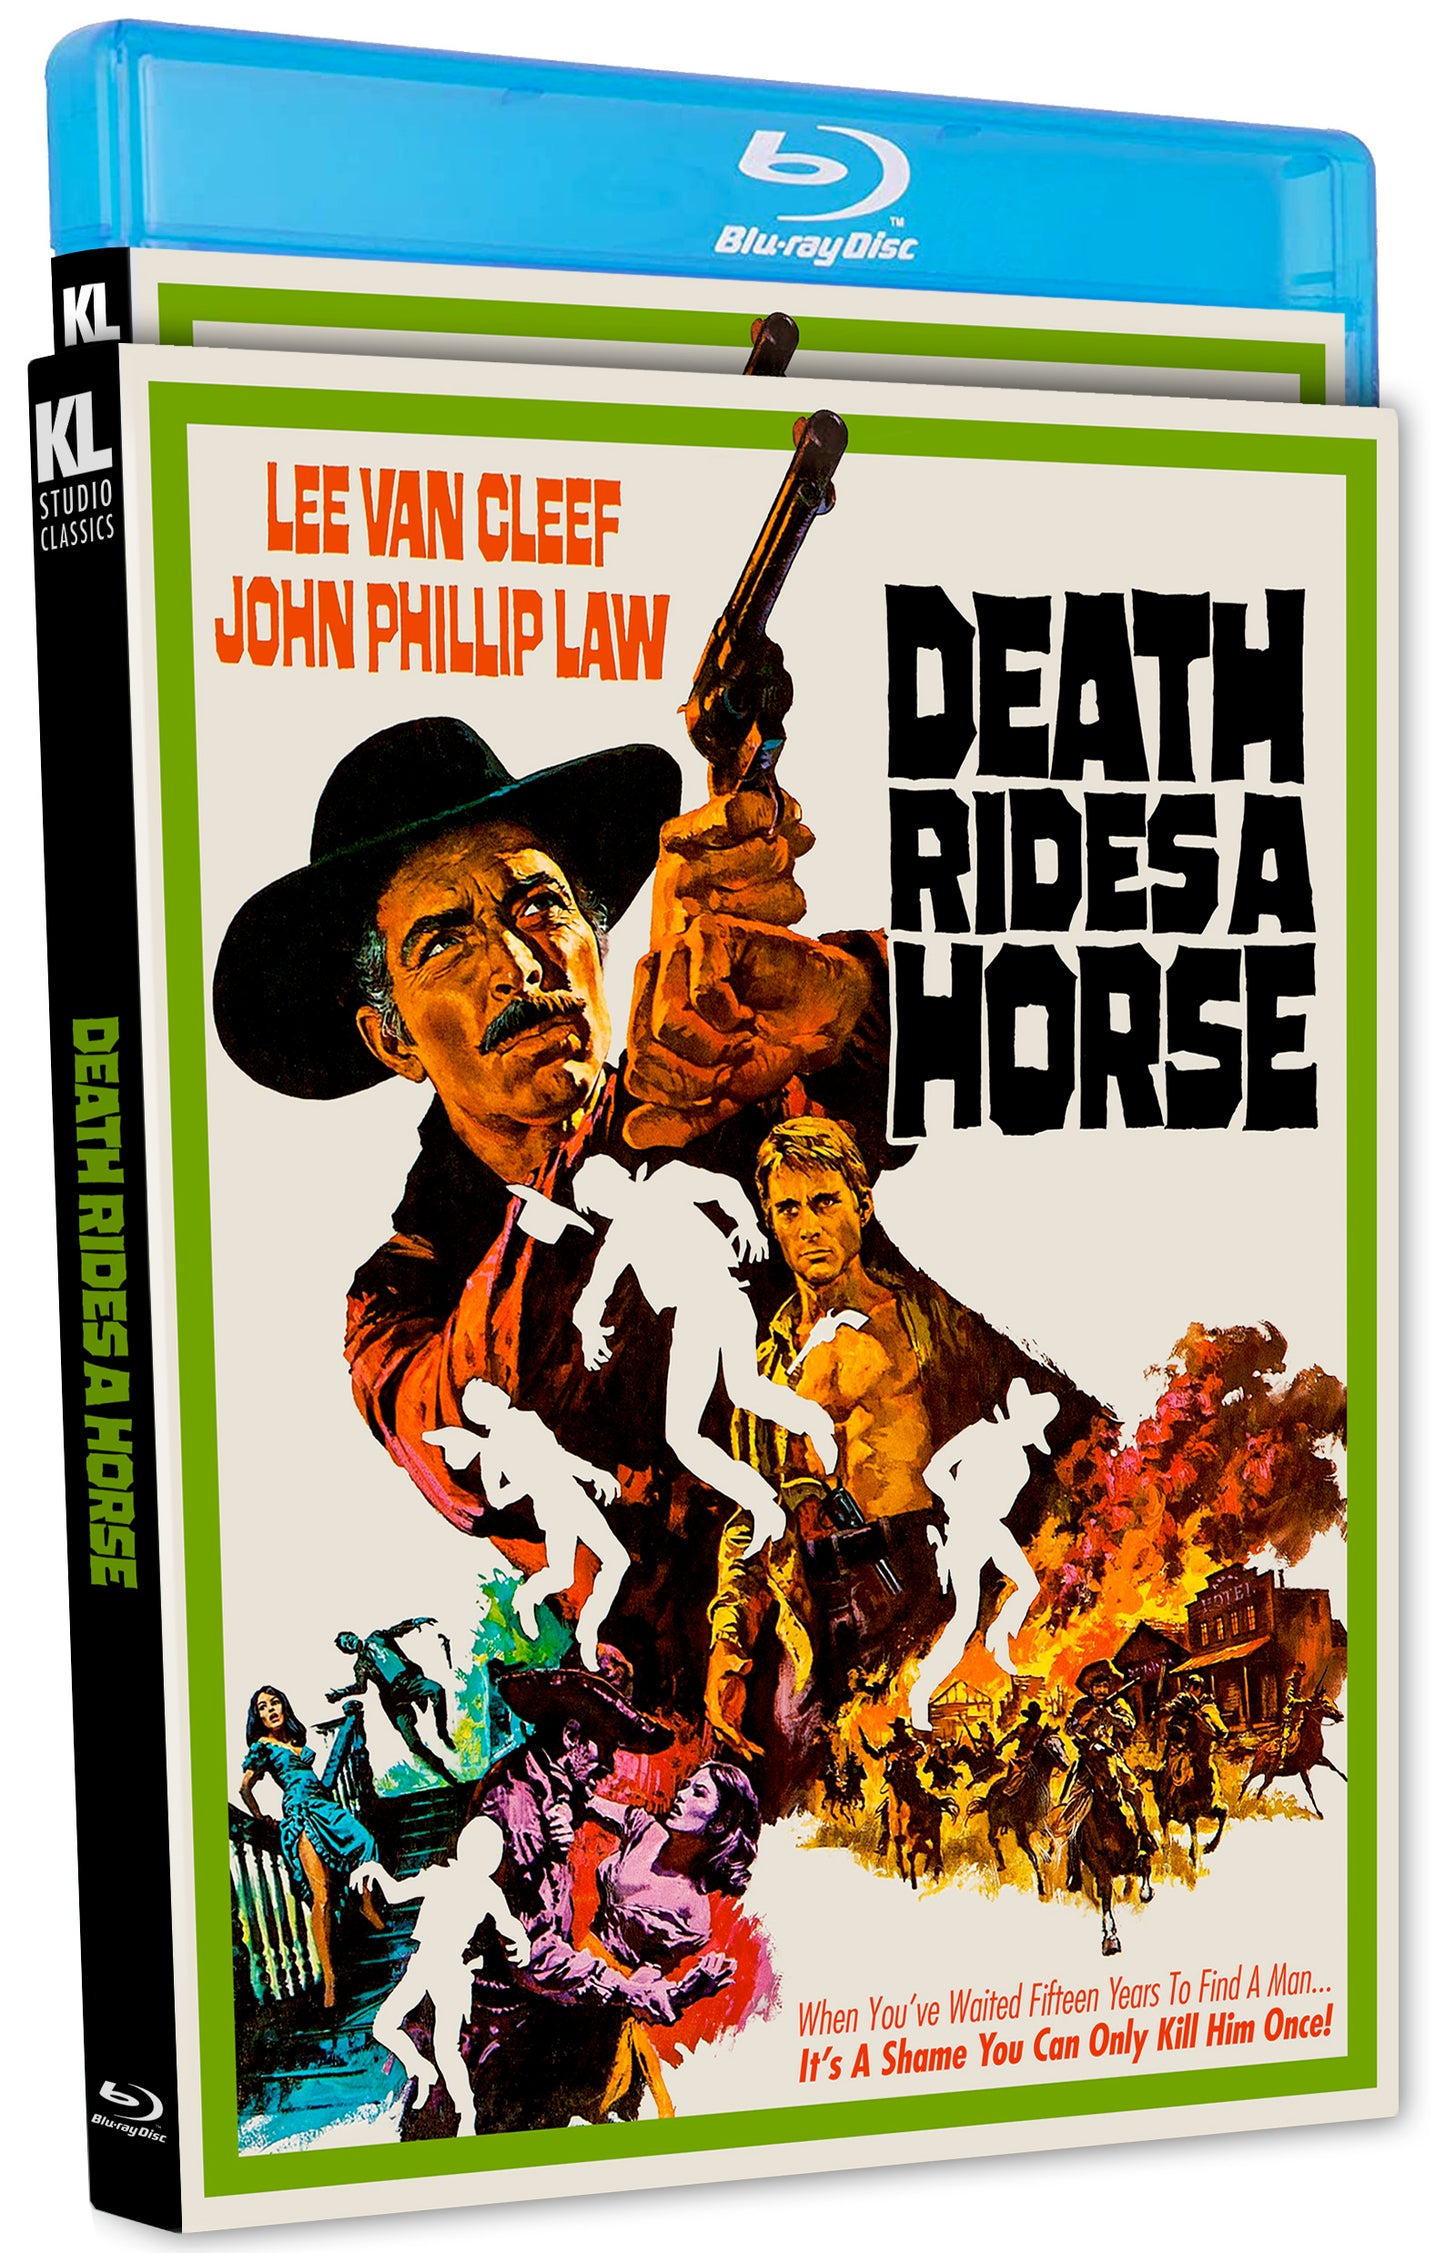 Death Rides a Horse Blu-ray Special Edition with Slipcover (Kino Lorber) [Preorder]